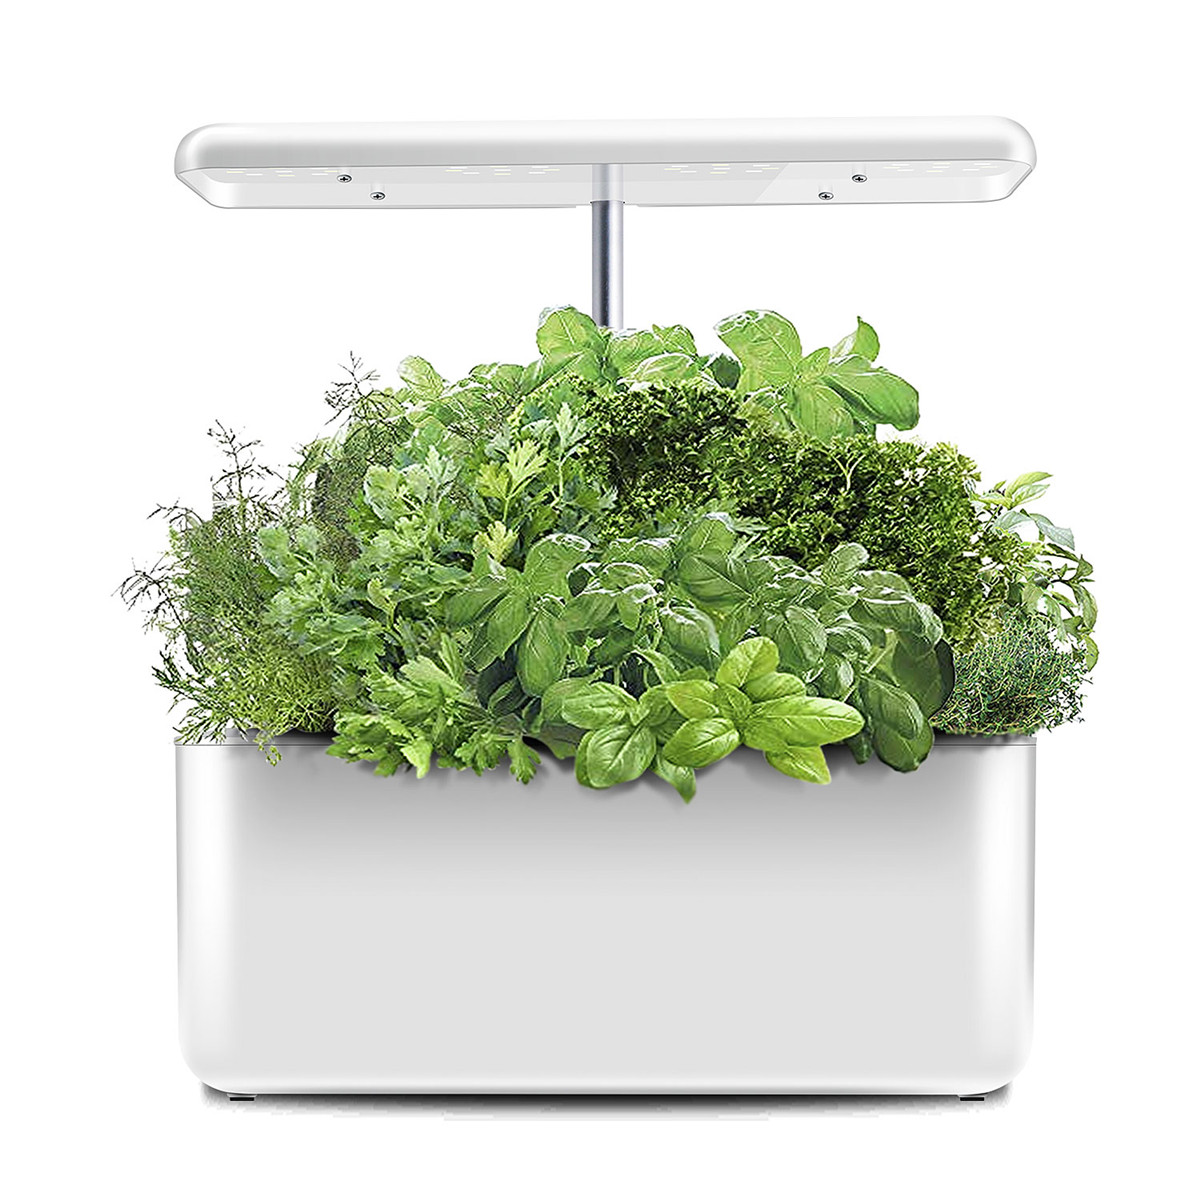 35W-Indoor-Plant-Hydroponics-Grow-Light-LED-Garden-Light-For-Plants-Flowers-Seedling-Cultivation-1570166-6